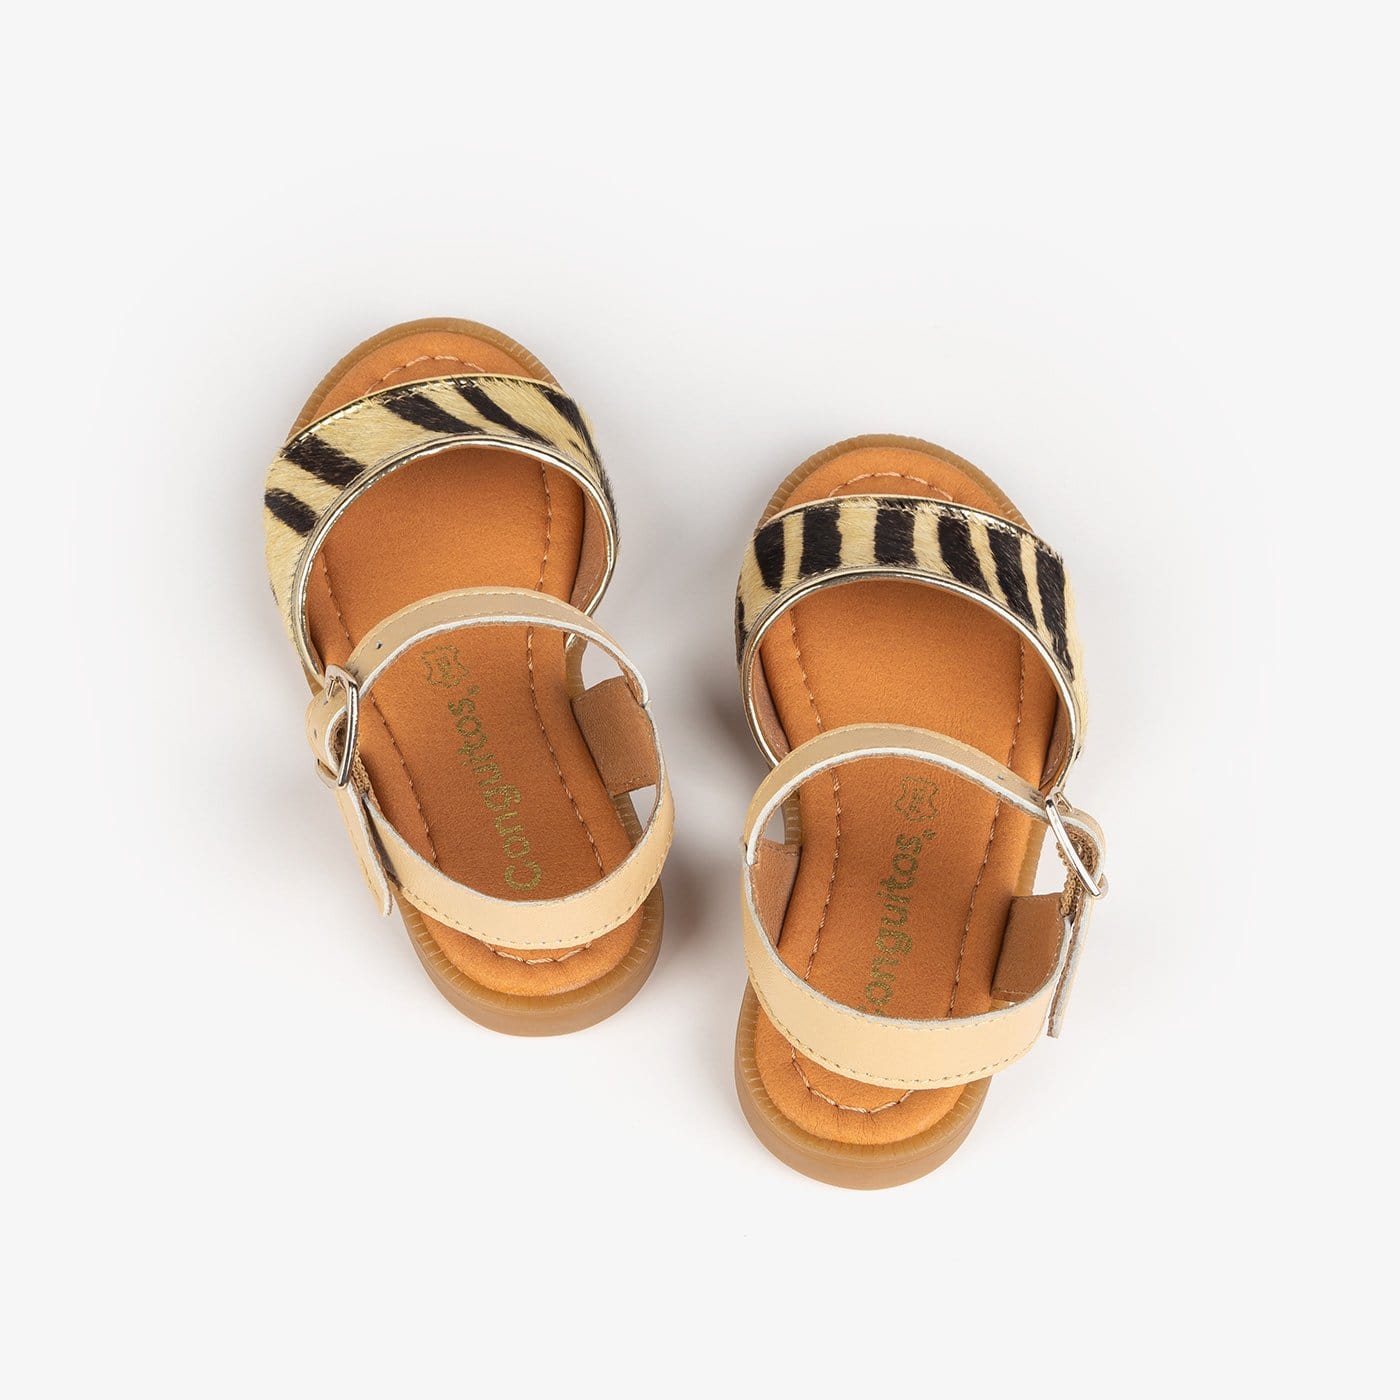 CONGUITOS Shoes Girl's Zebra Leather Sandals